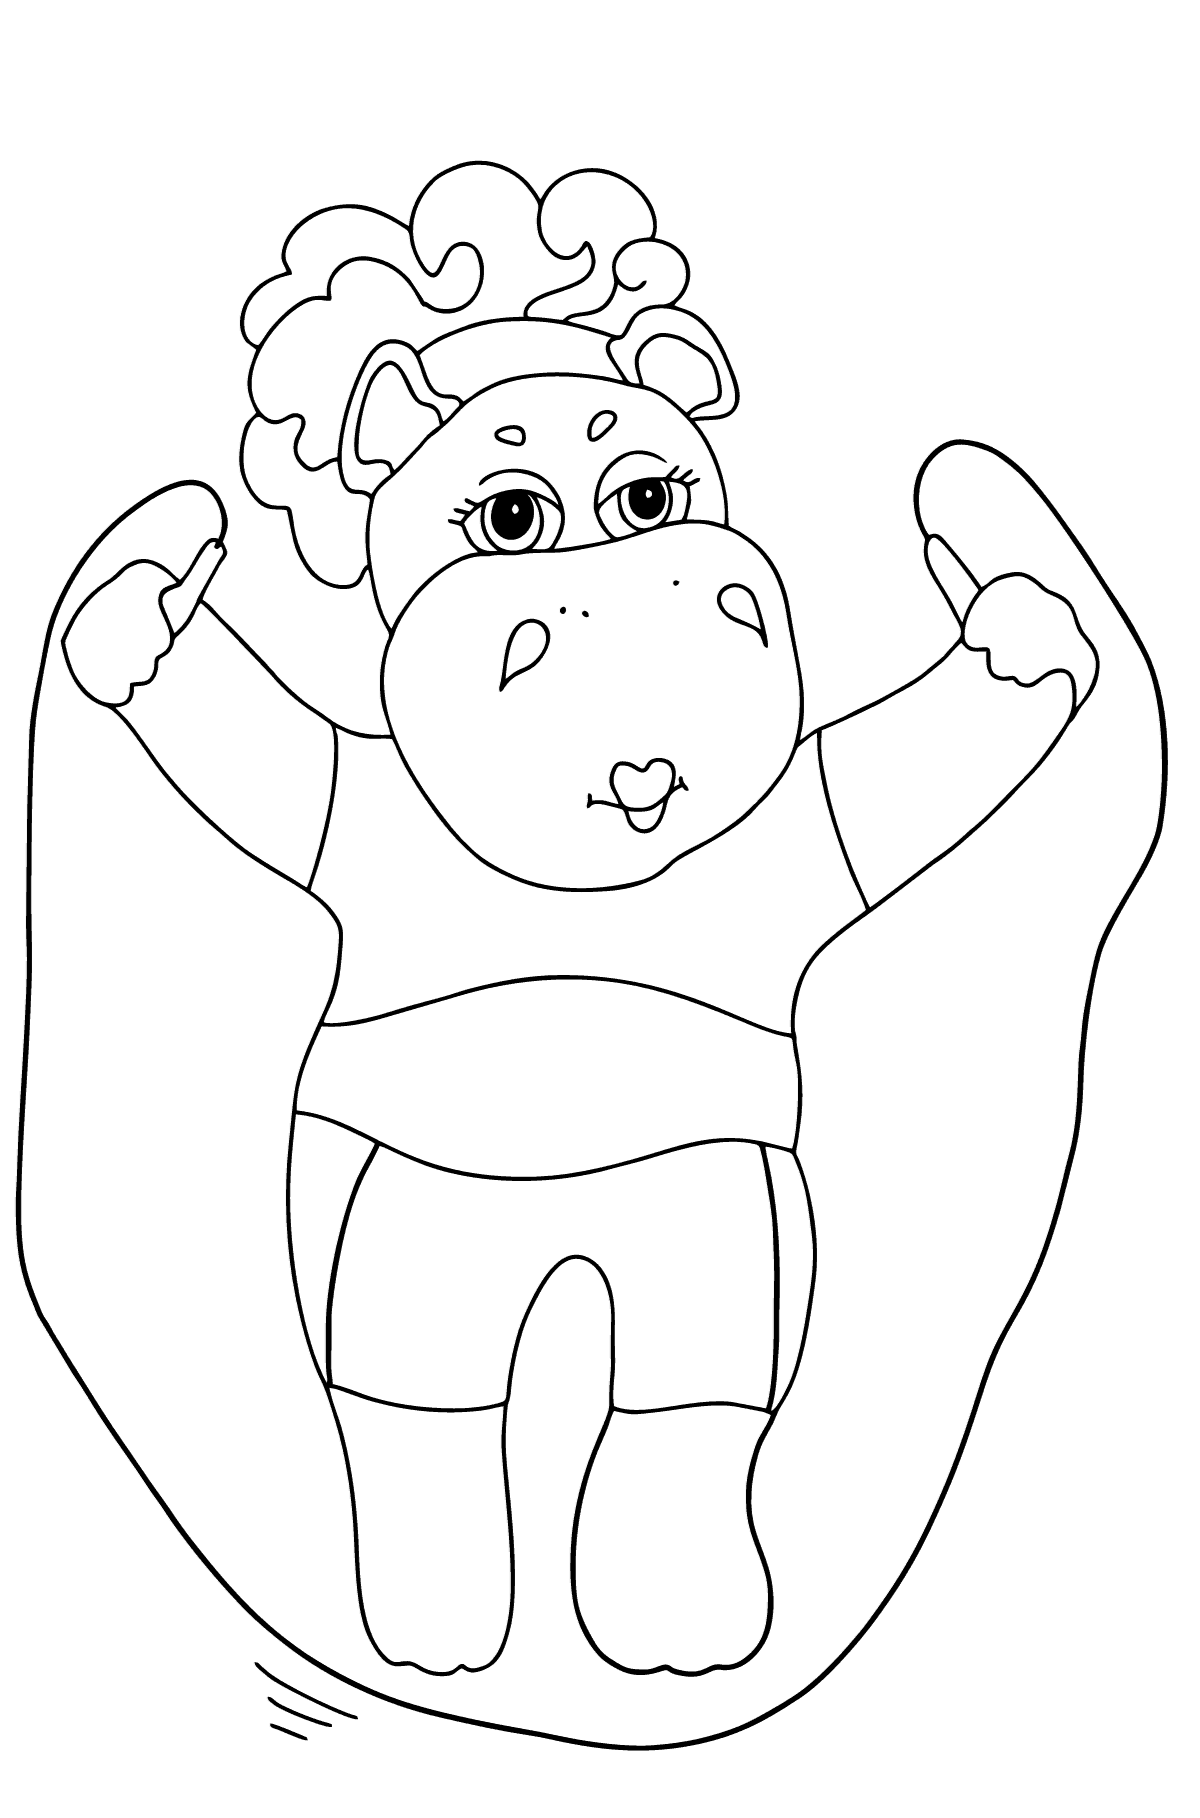 Cheerful Hippo coloring page - Coloring Pages for Kids